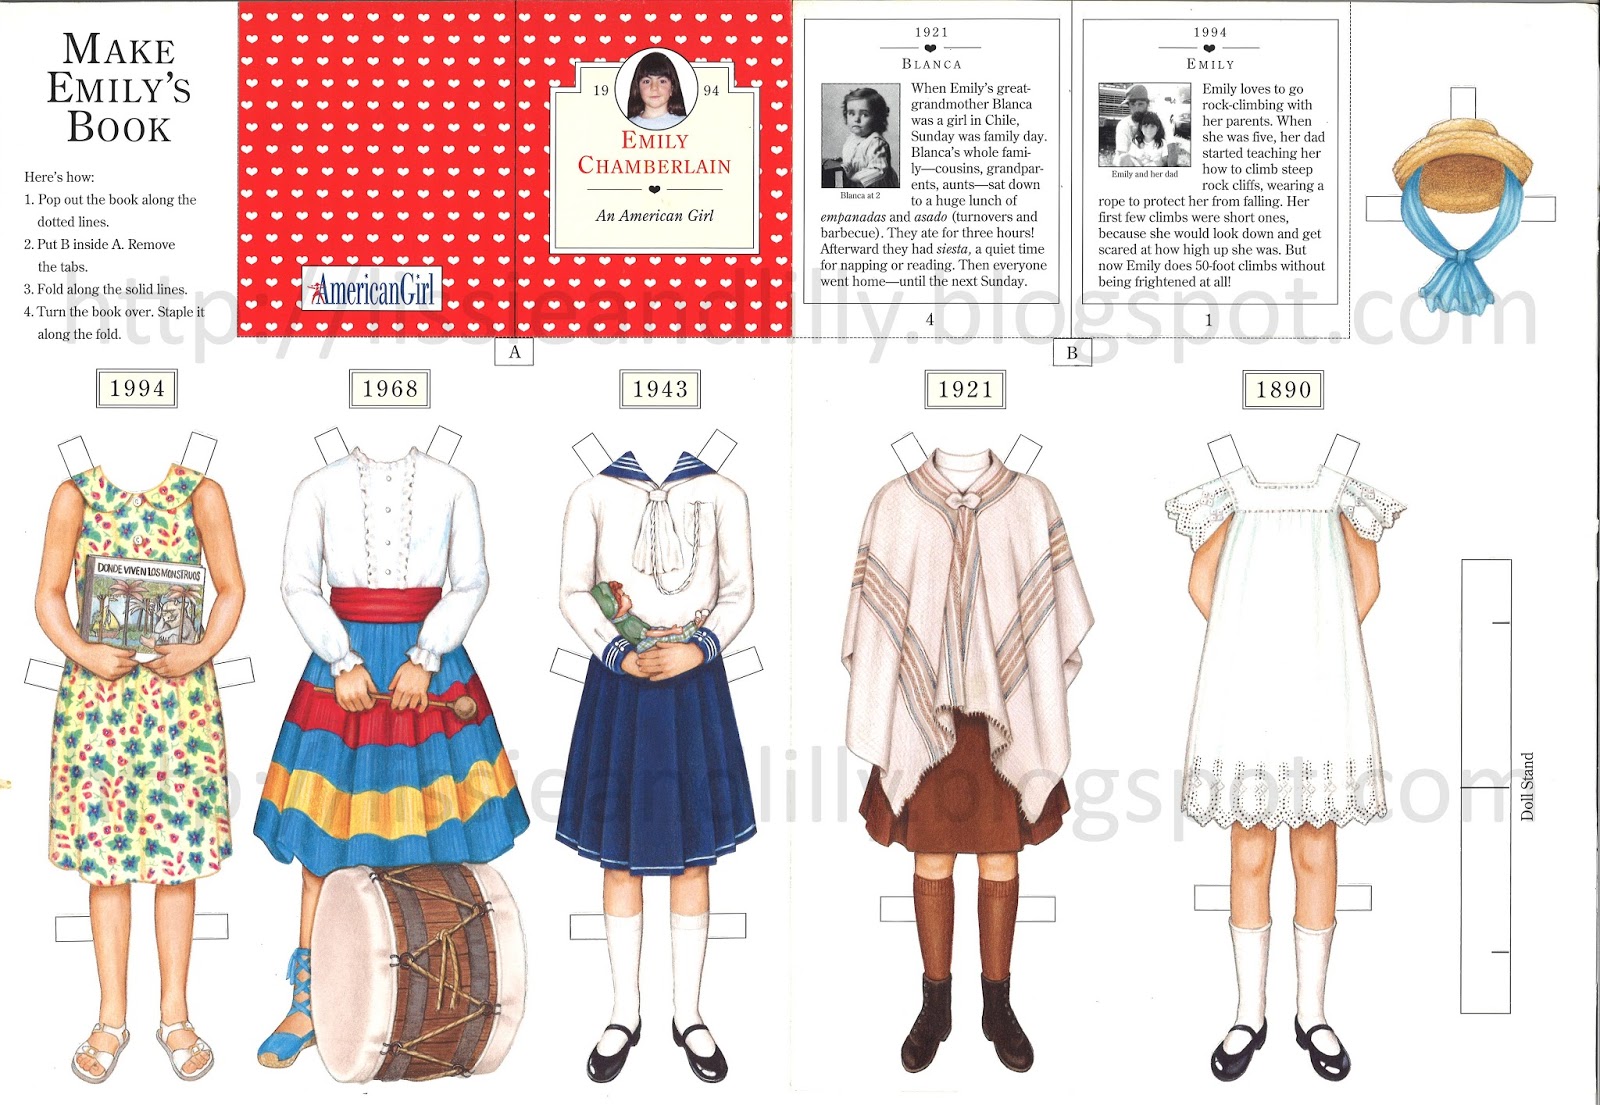 Magnetic Paper Dolls Single Doll Set 2 Emily, Lindsey & Hannah by Lee  Publications